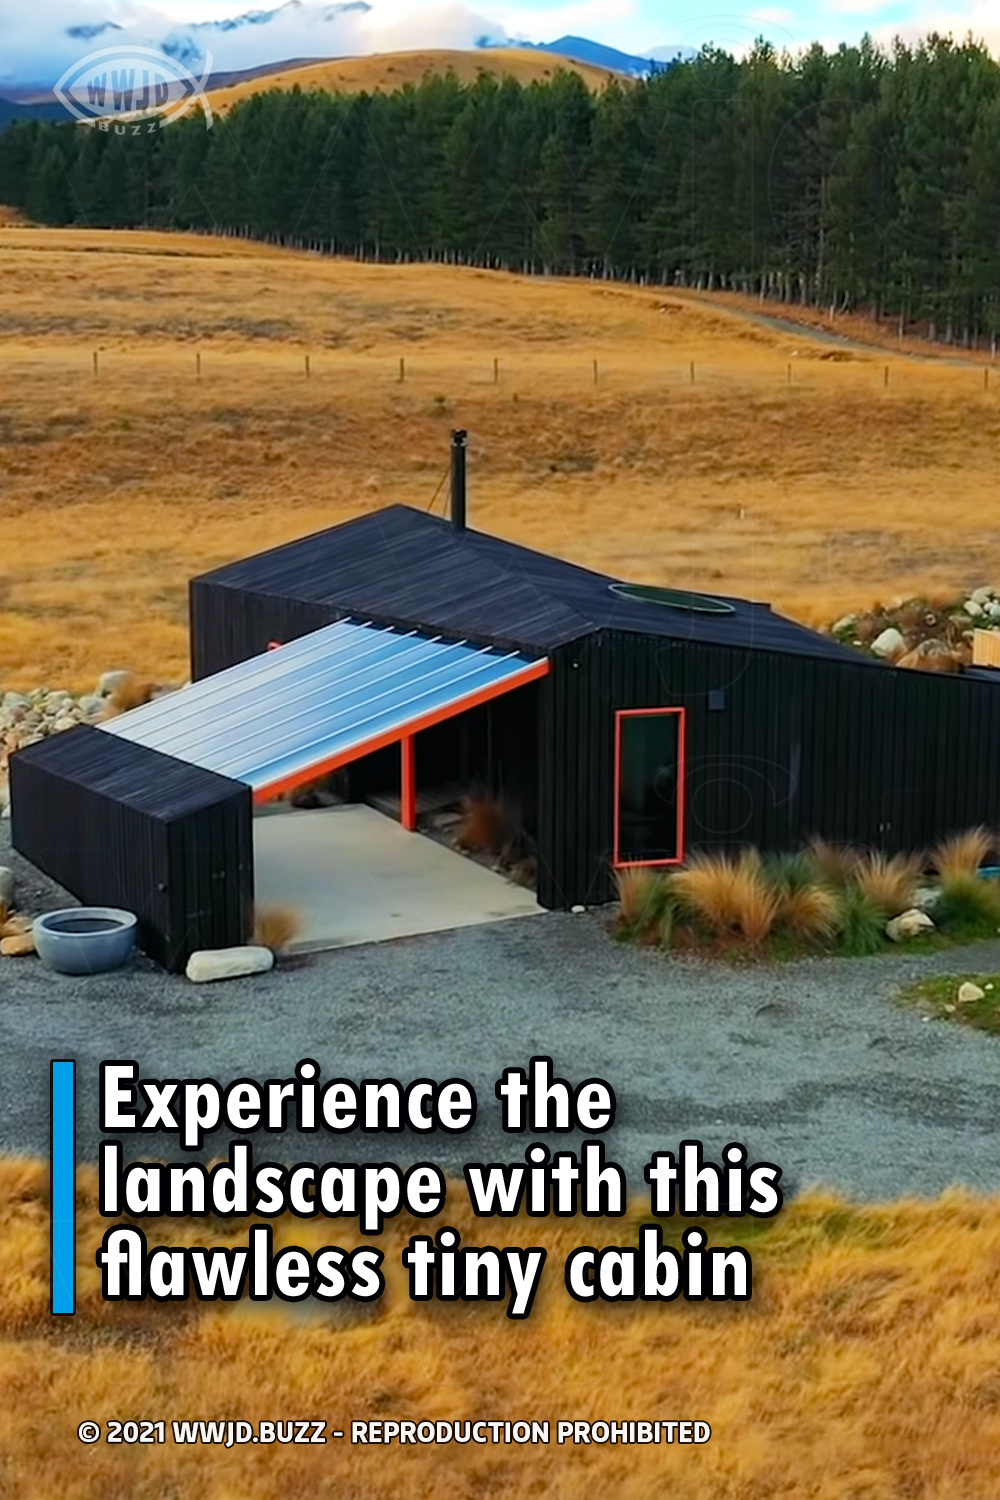 Experience the landscape with this flawless tiny cabin